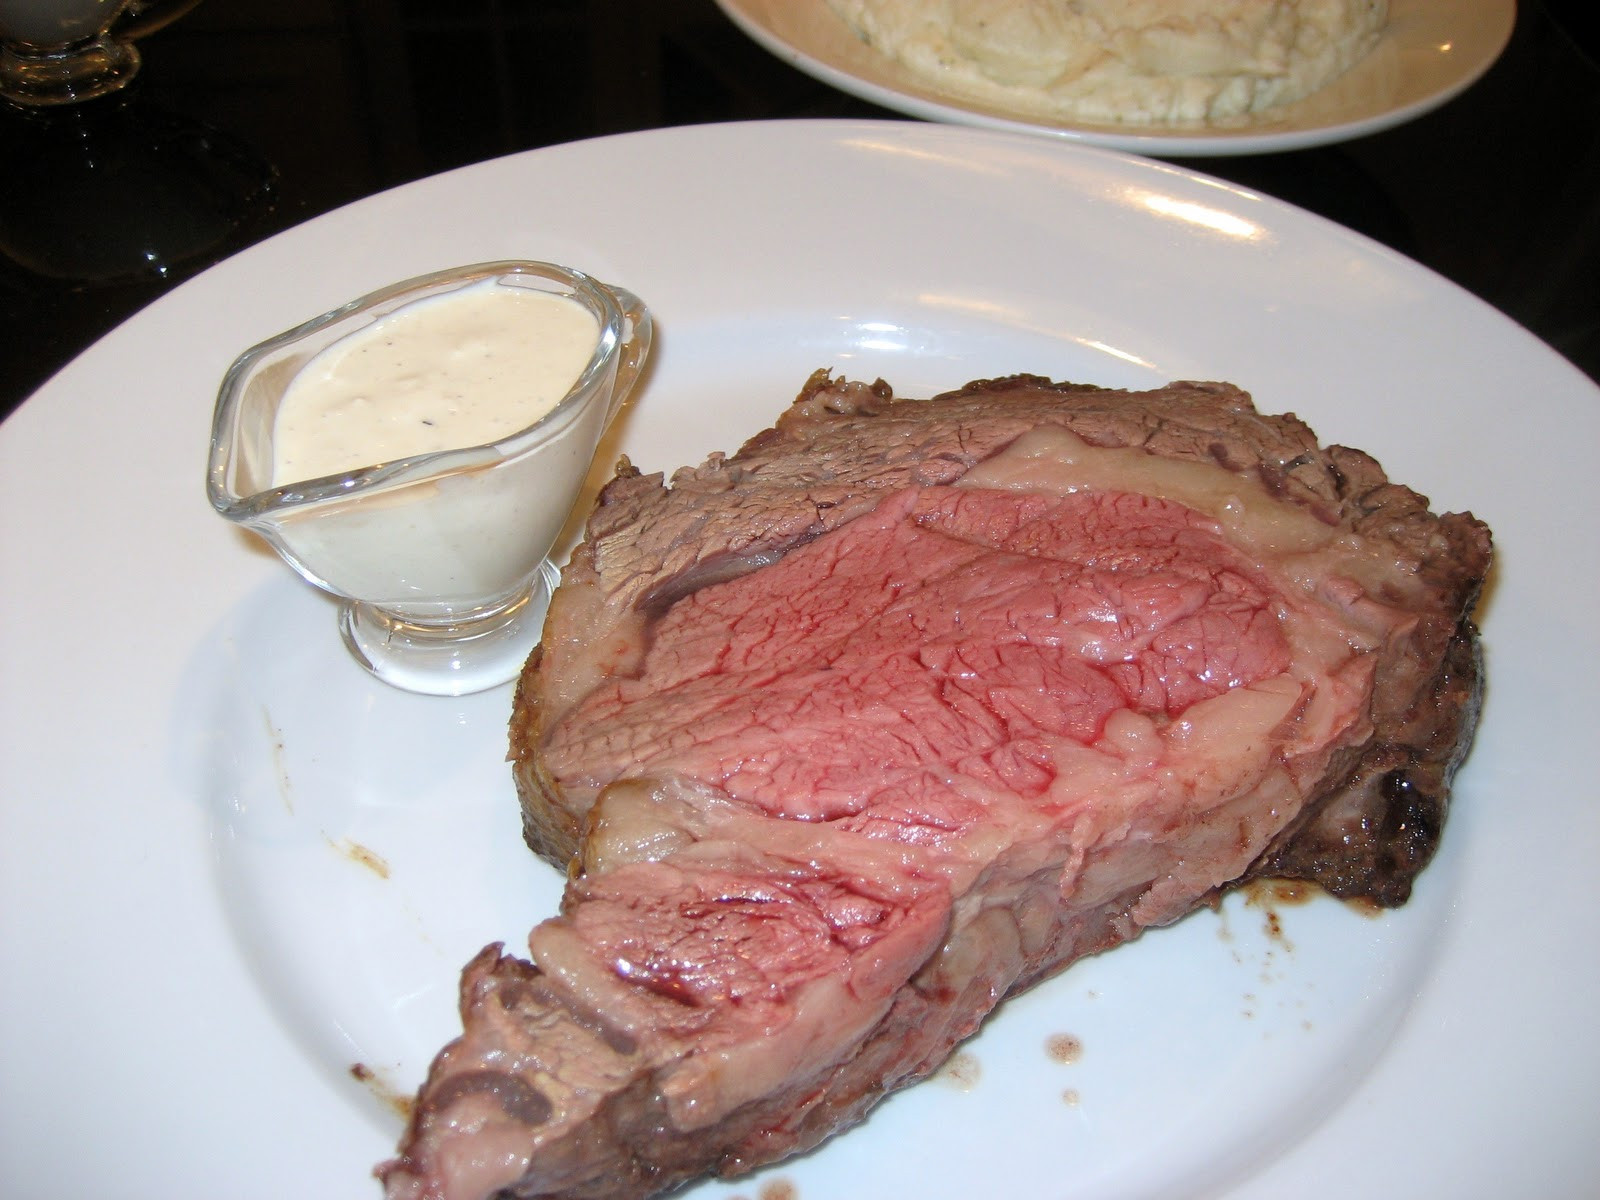 Horseradish Dip For Prime Rib
 Everything Tasty from My Kitchen Prime Rib with